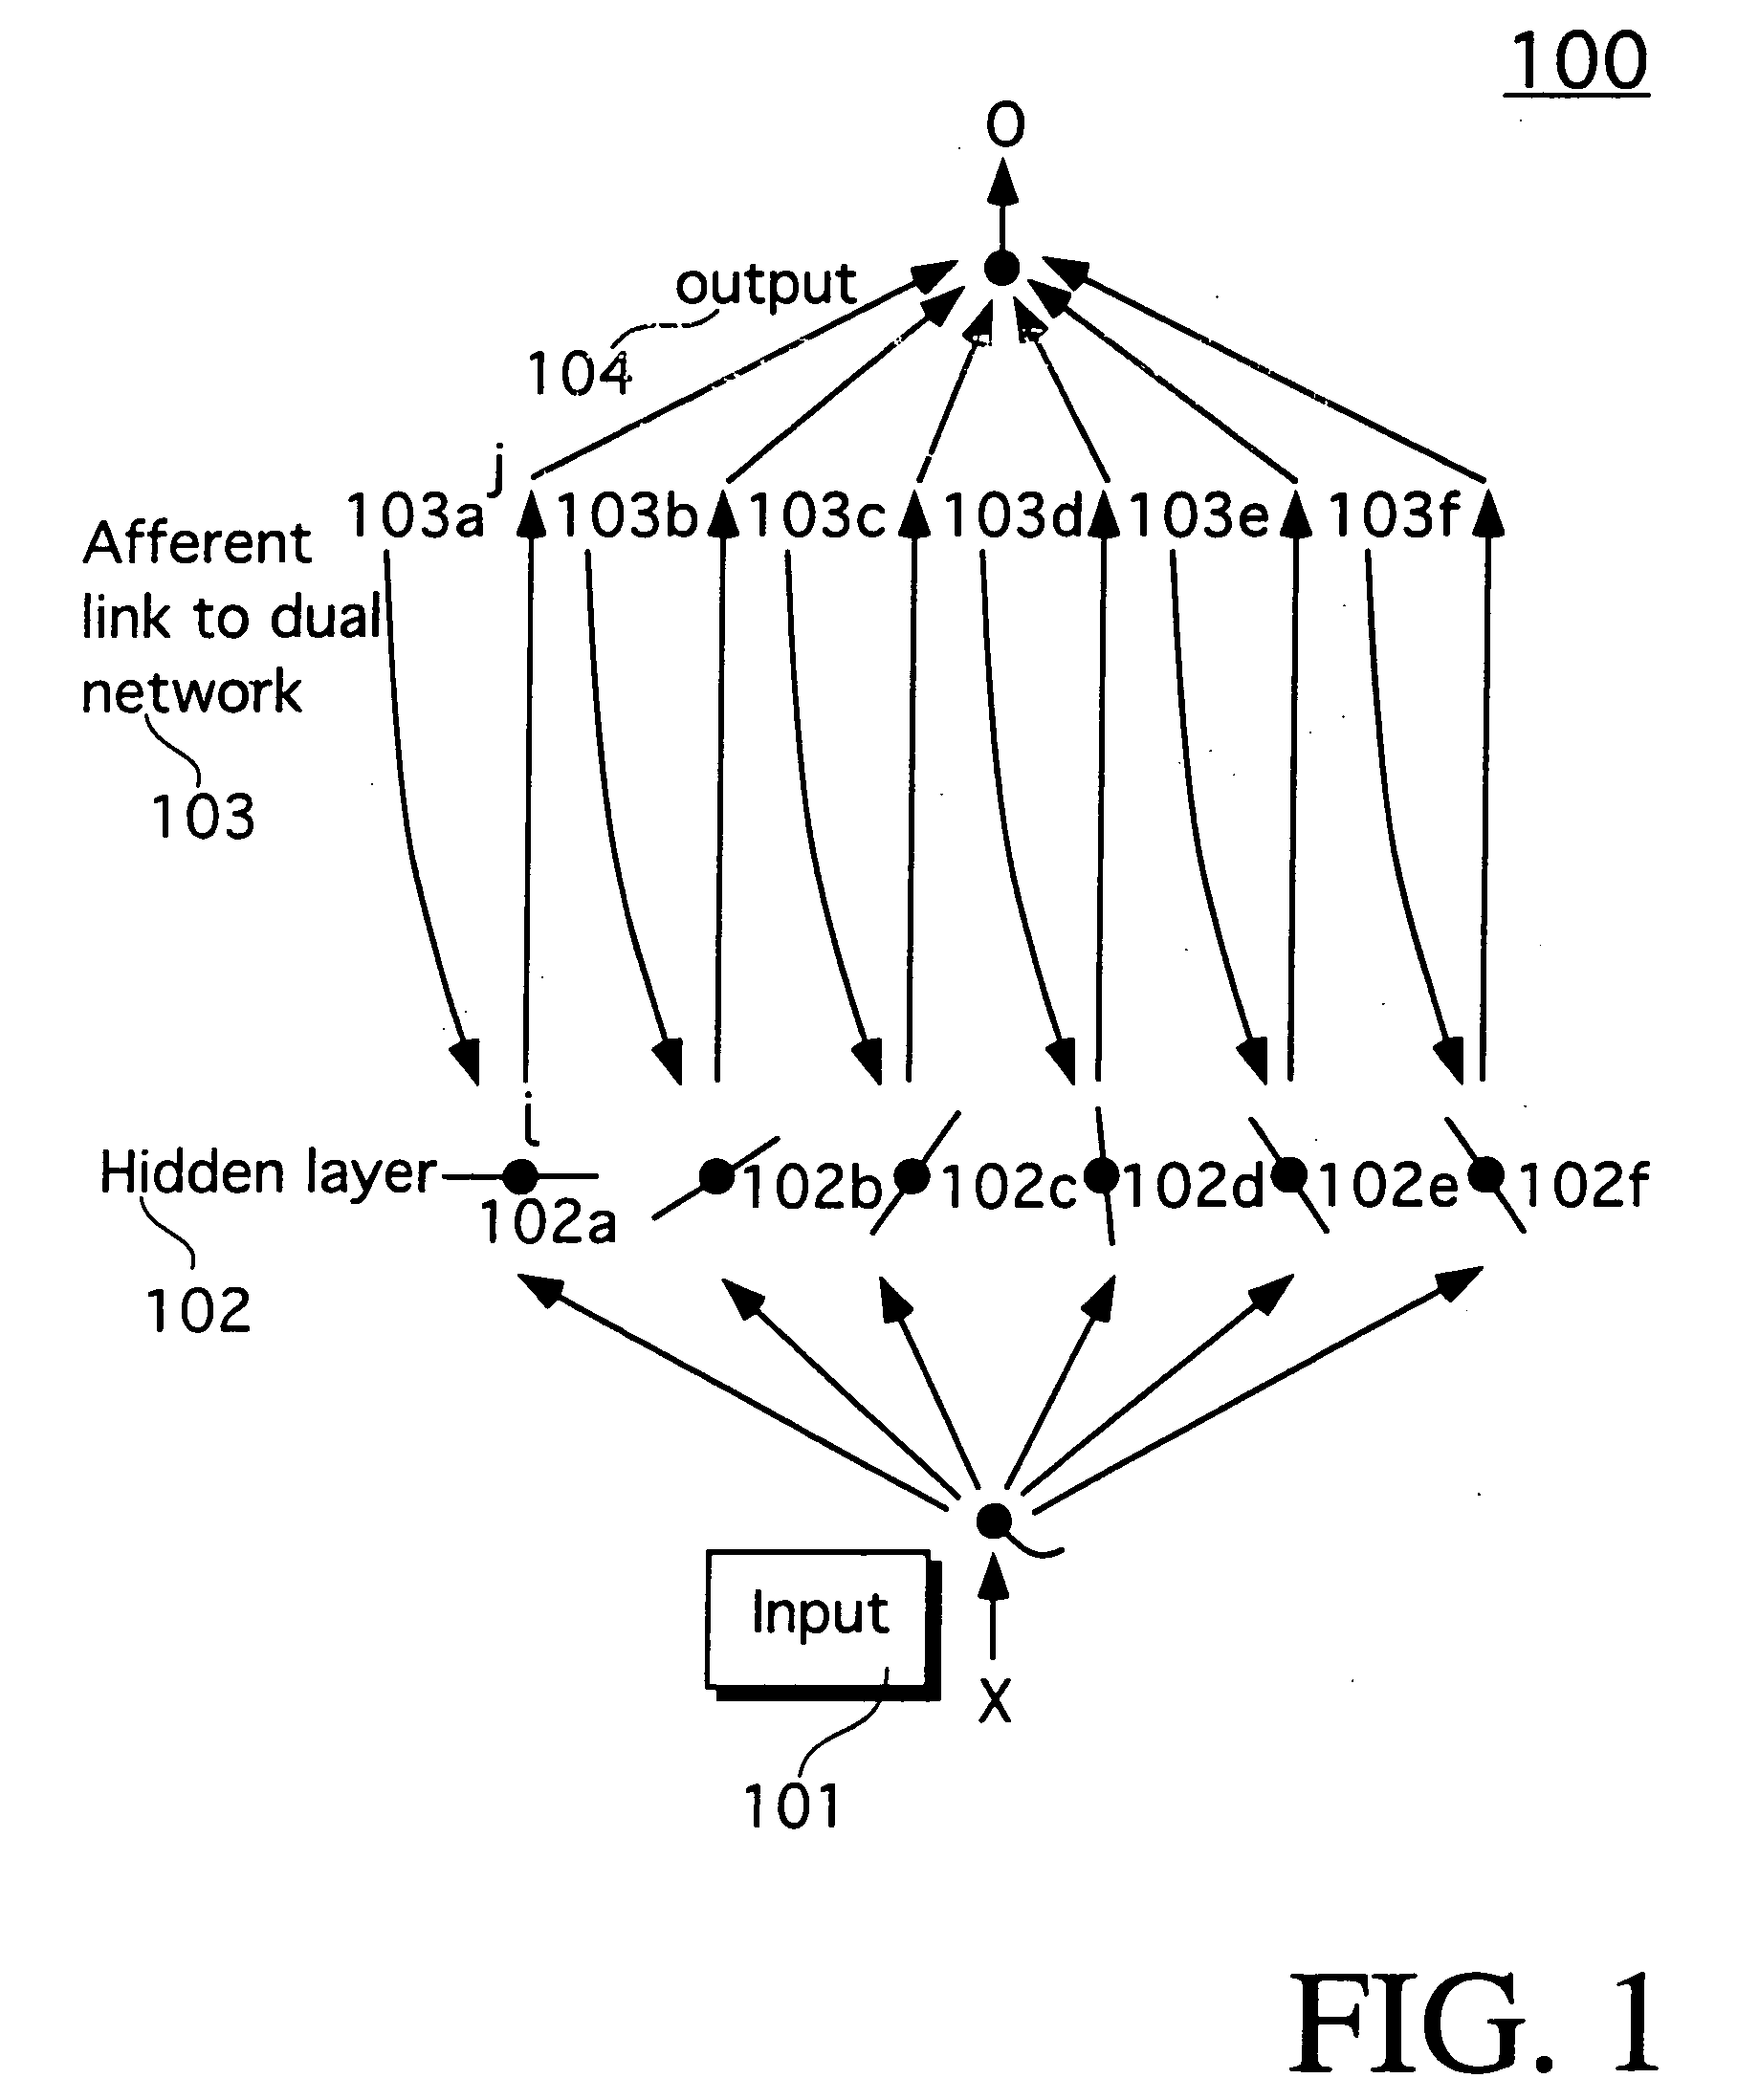 Method and apparatus of using neural network to train a neural network